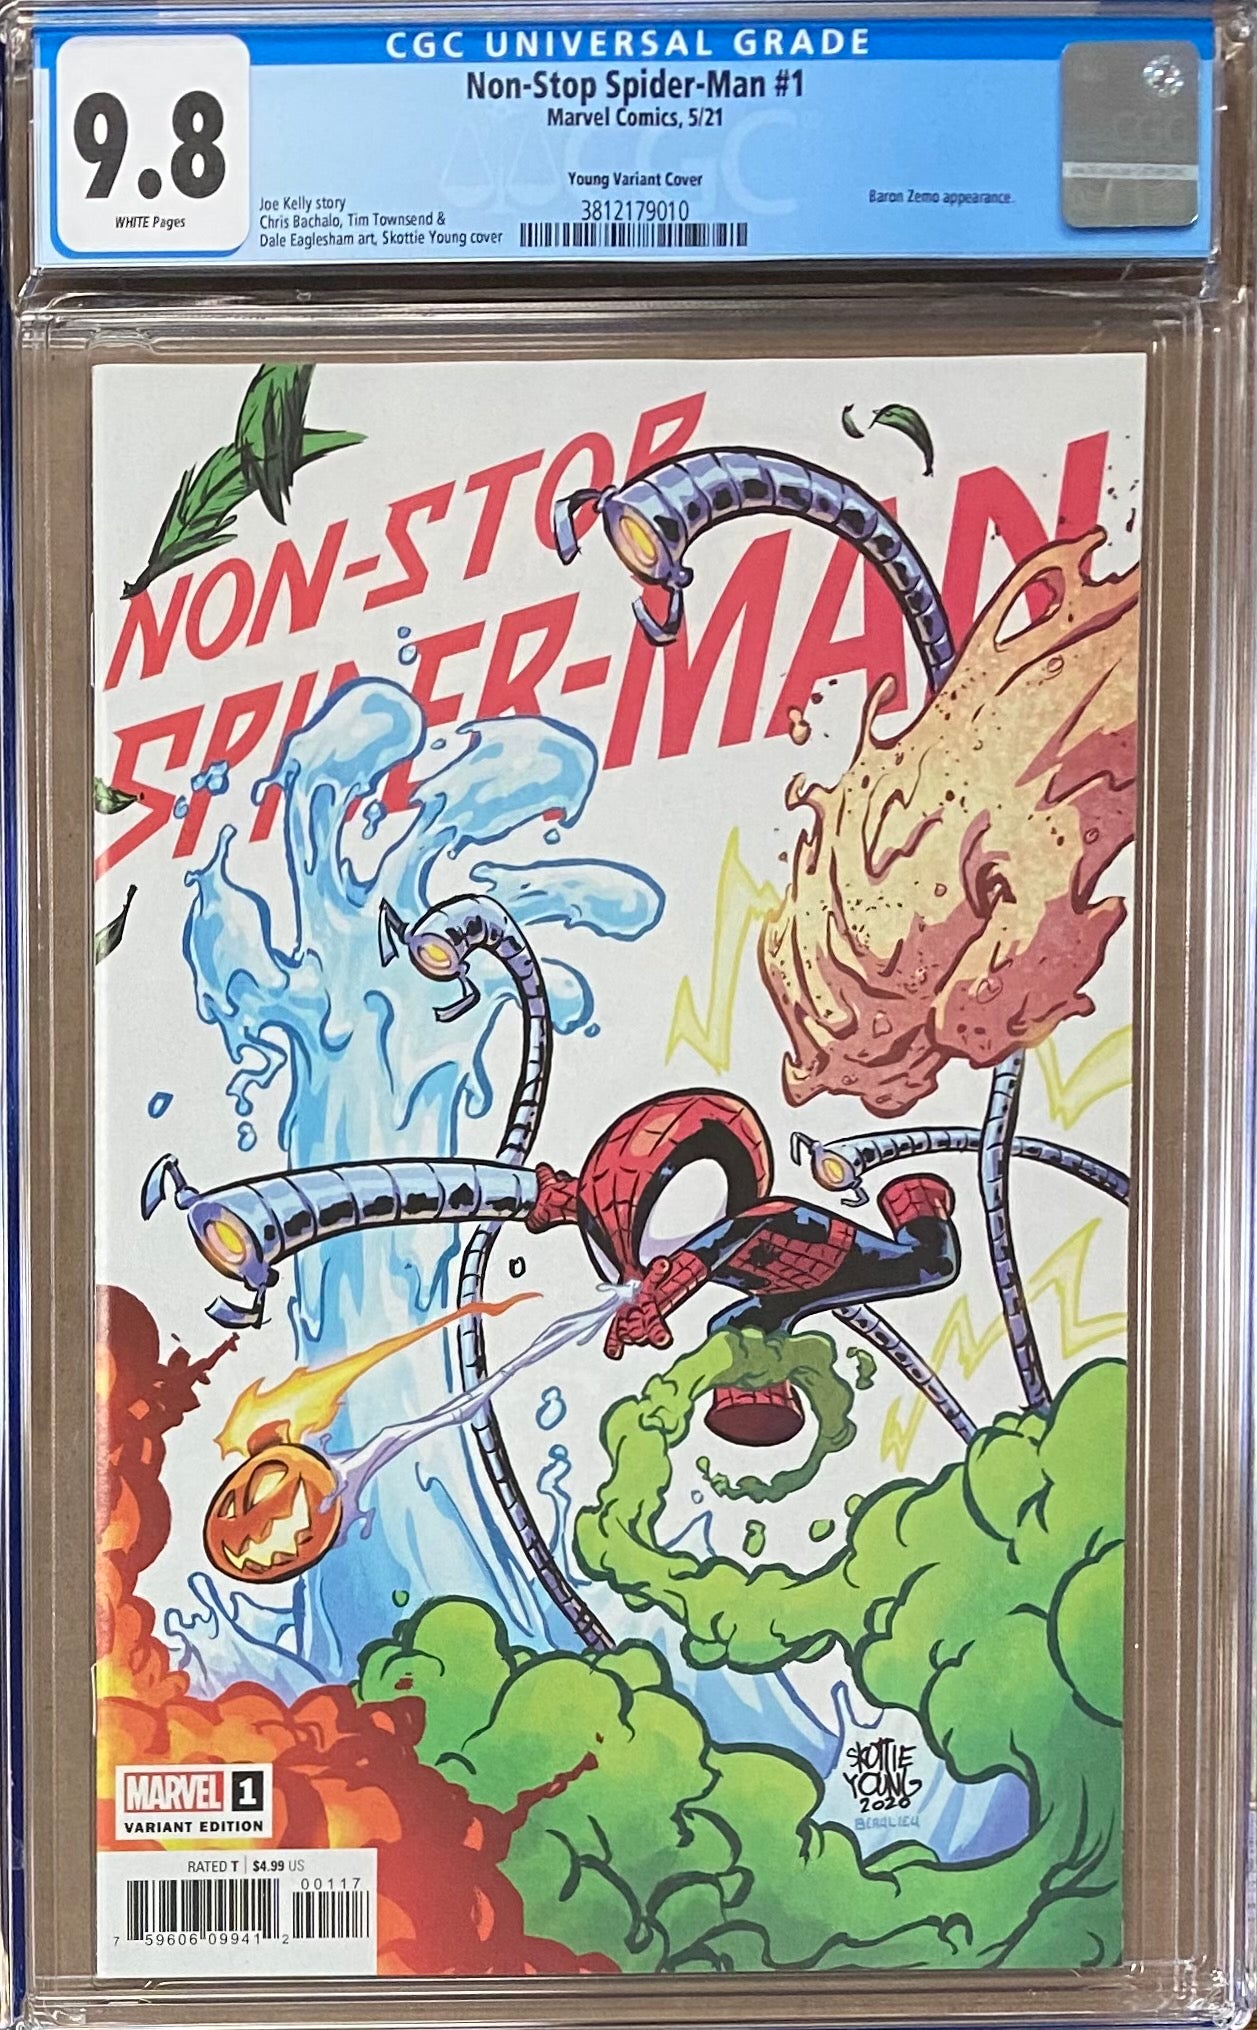 Non-Stop Spider-Man #1 Young Variant CGC 9.8